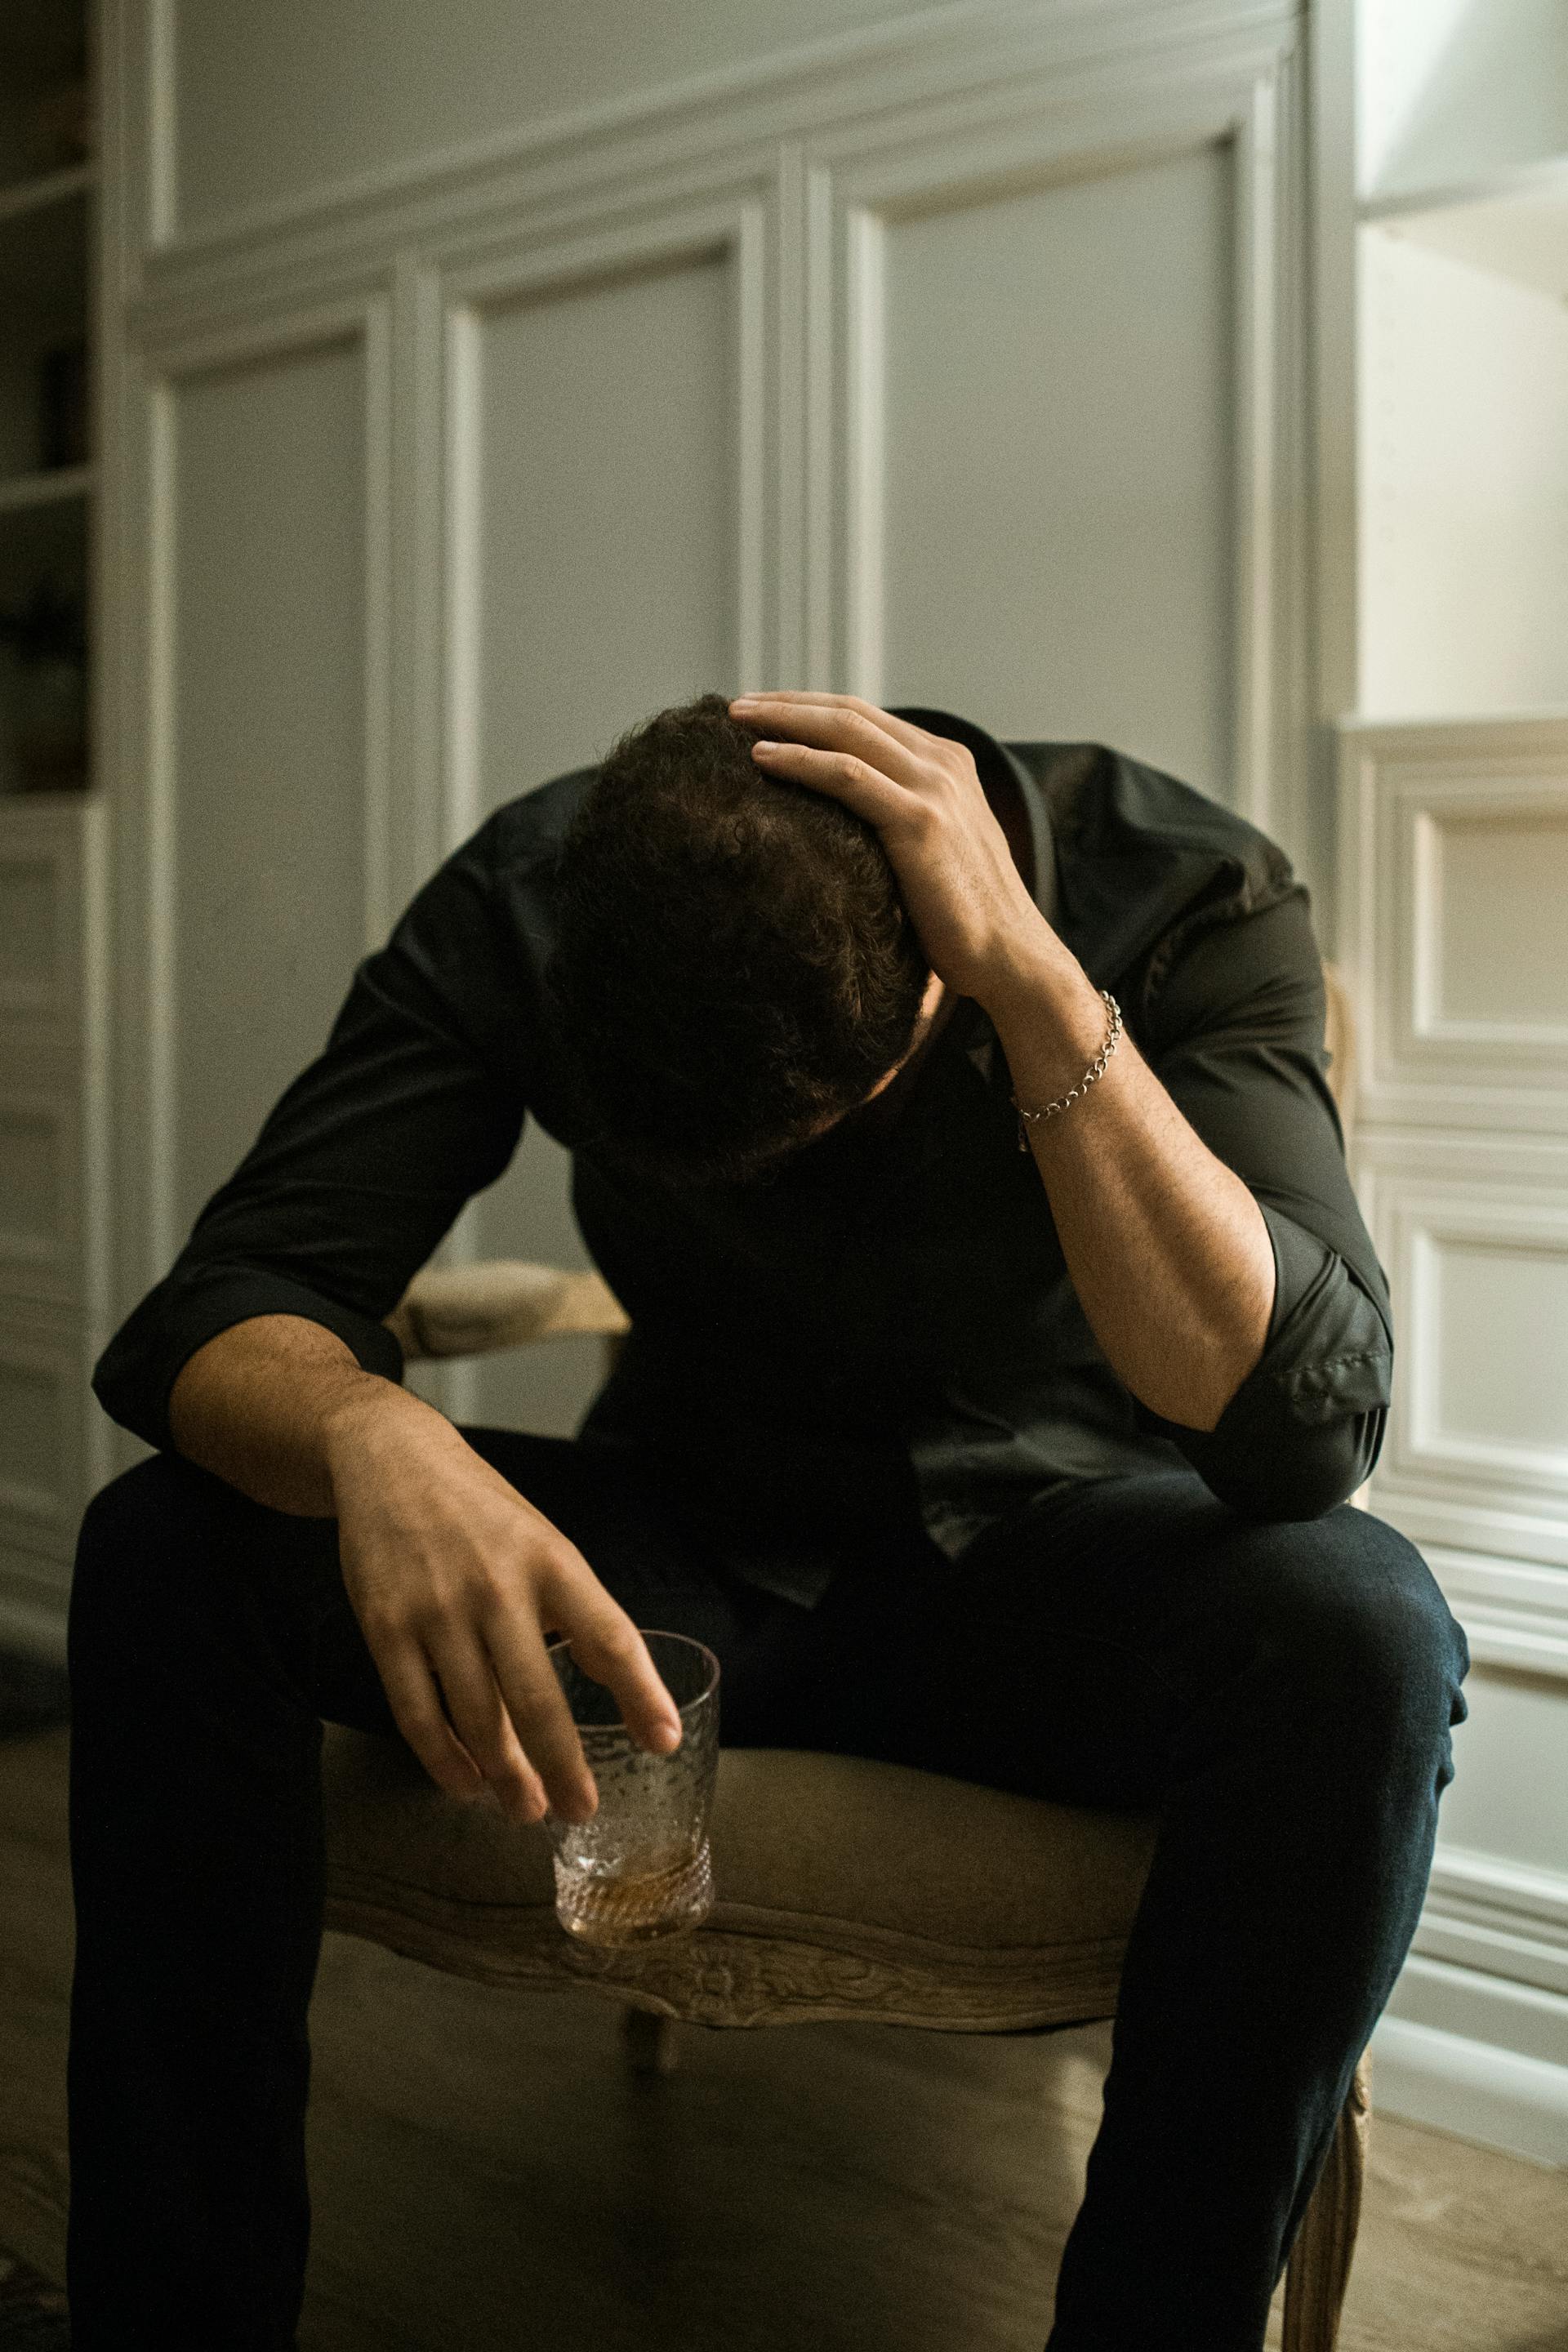 A man sitting with his head bowed down while holding a drink | Source: Pexels